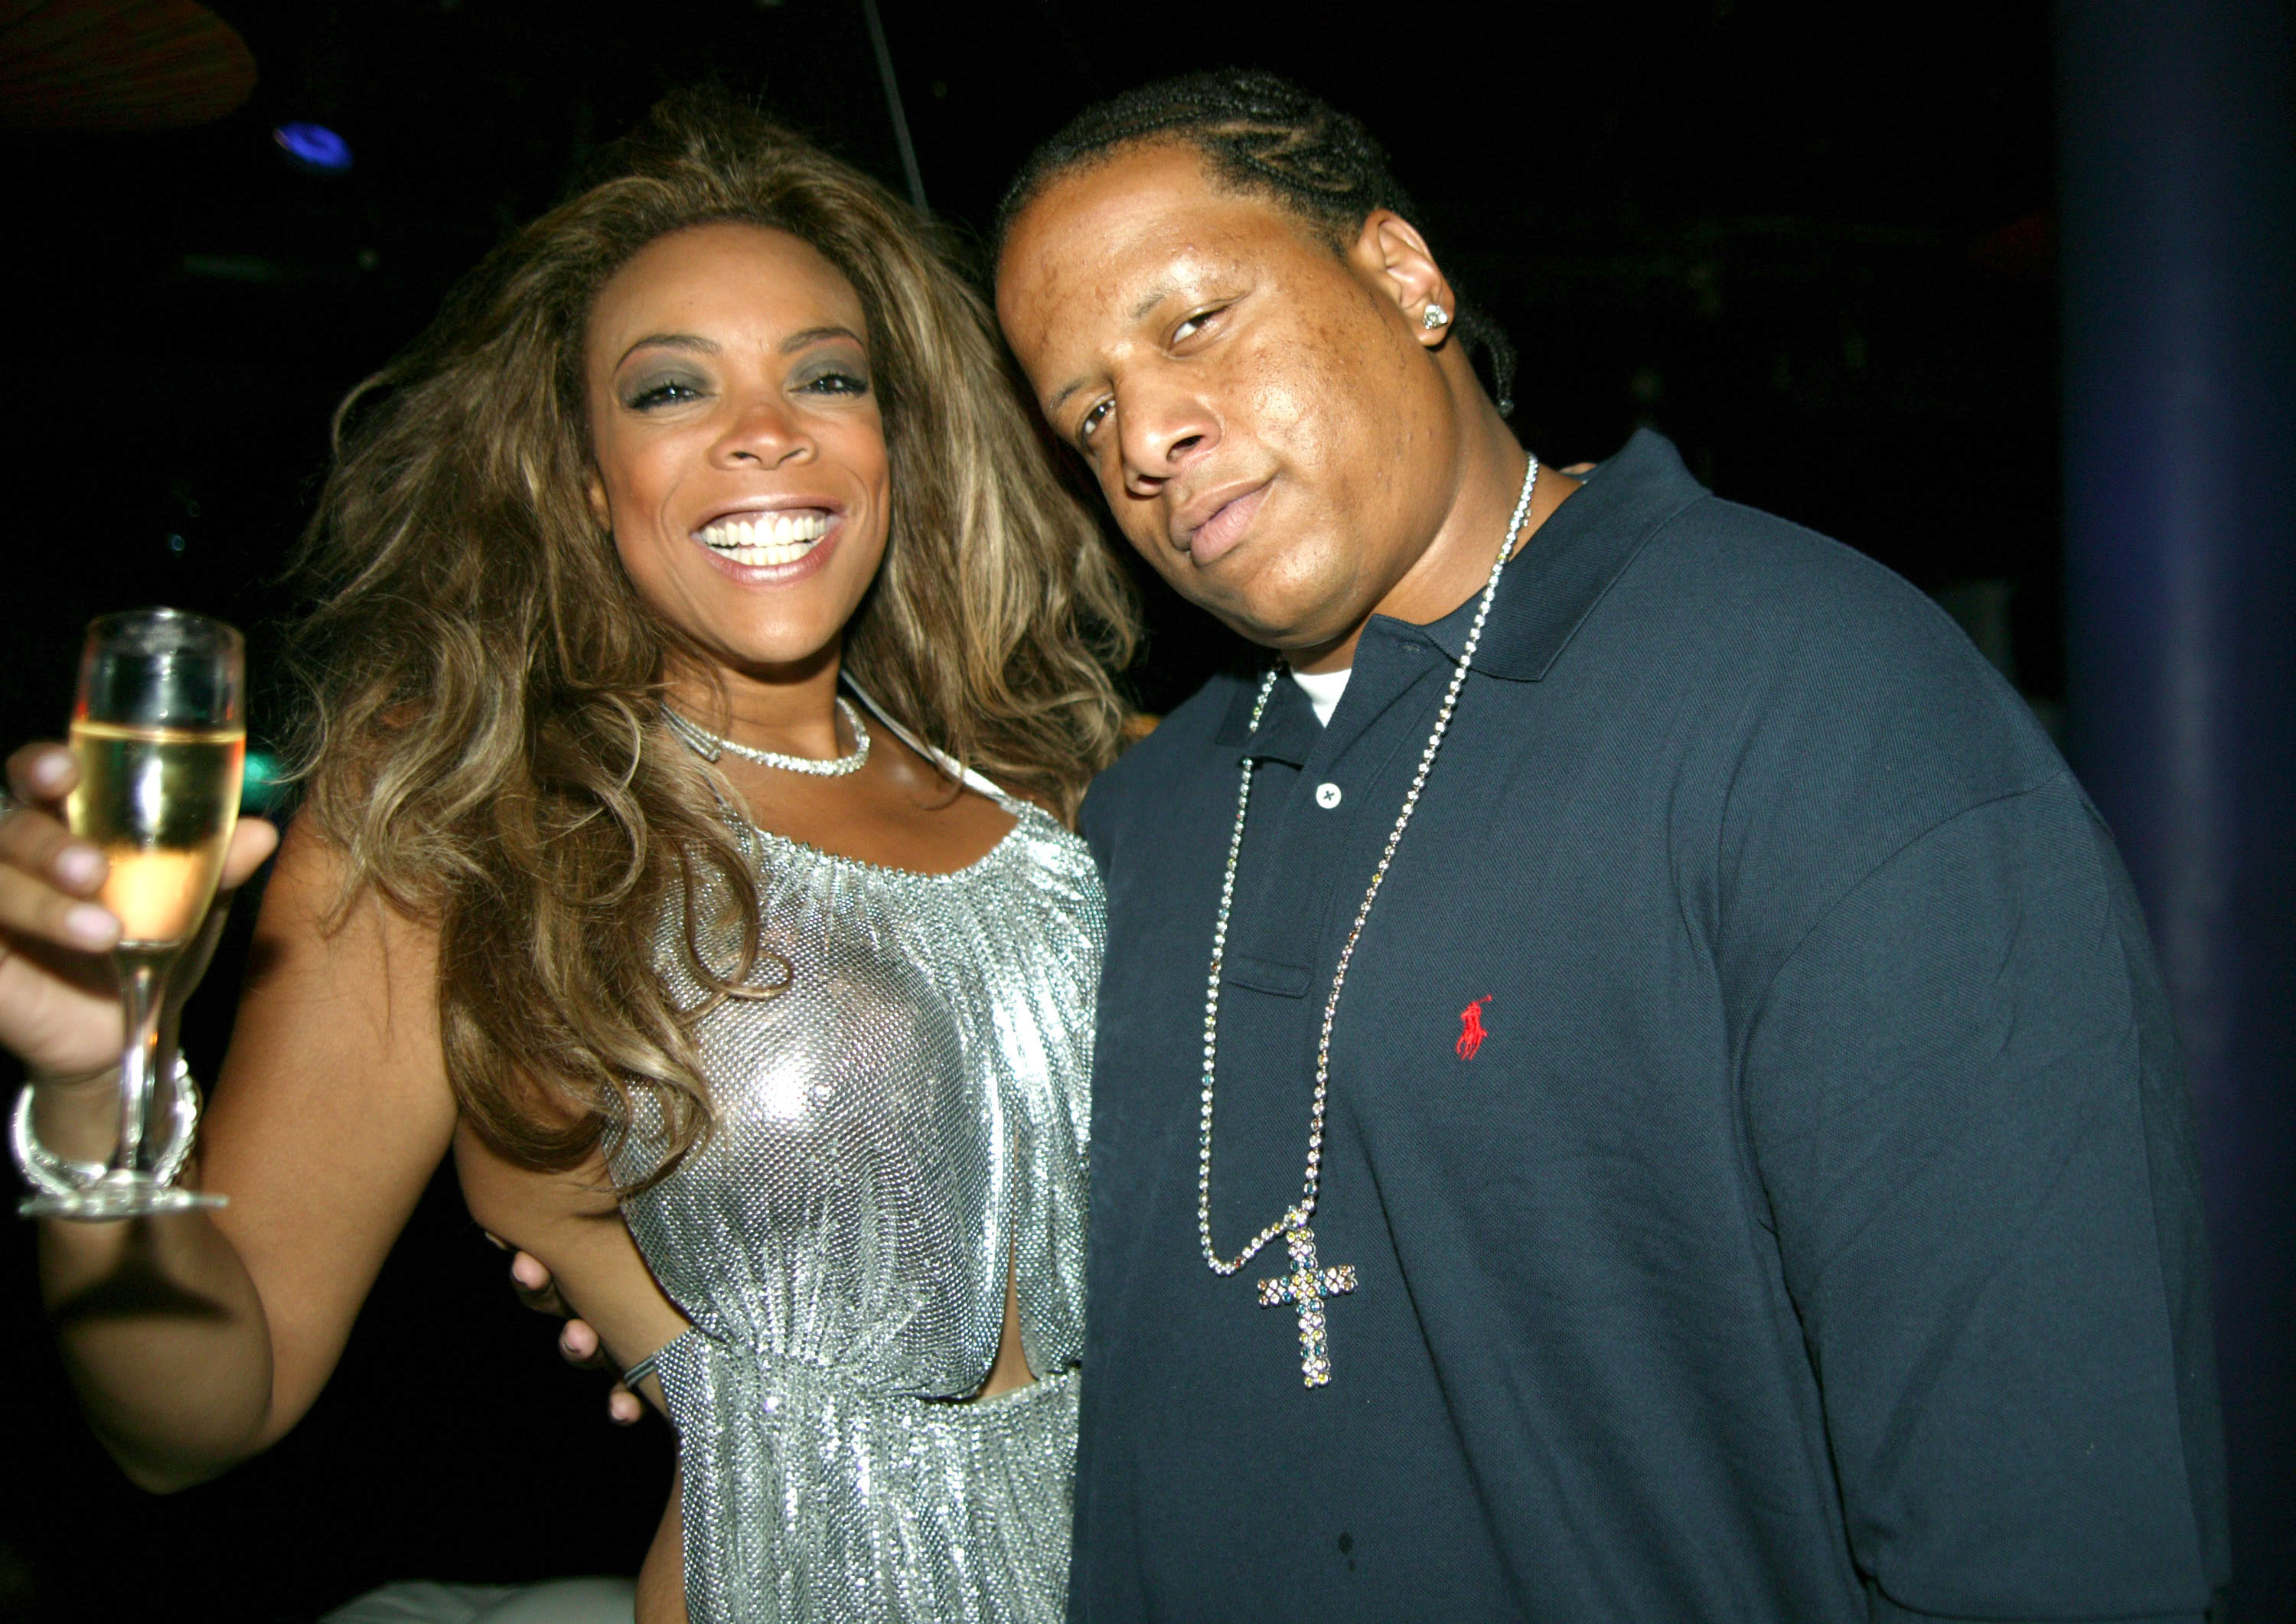 Wendy Williams and Kevin Hunter during her birthday party at Tens on July 20, 2004. | Source: Getty Images